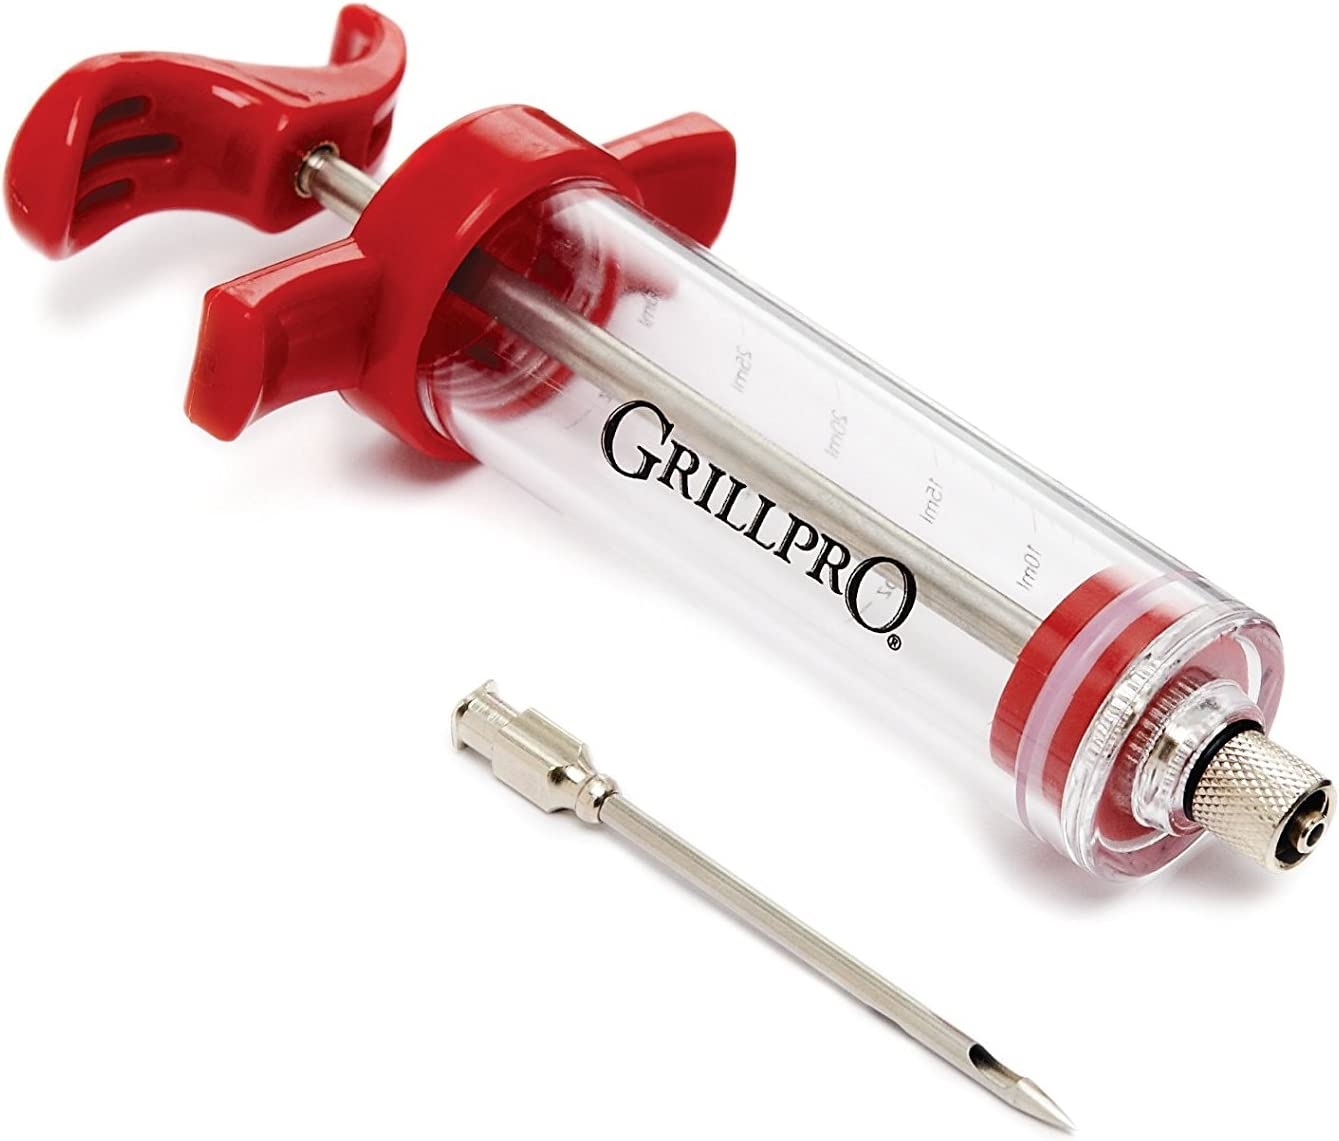 GrillPro 14950 Marinade Injector Import To Shop ×Product customization General Description Gallery Reviews Variations